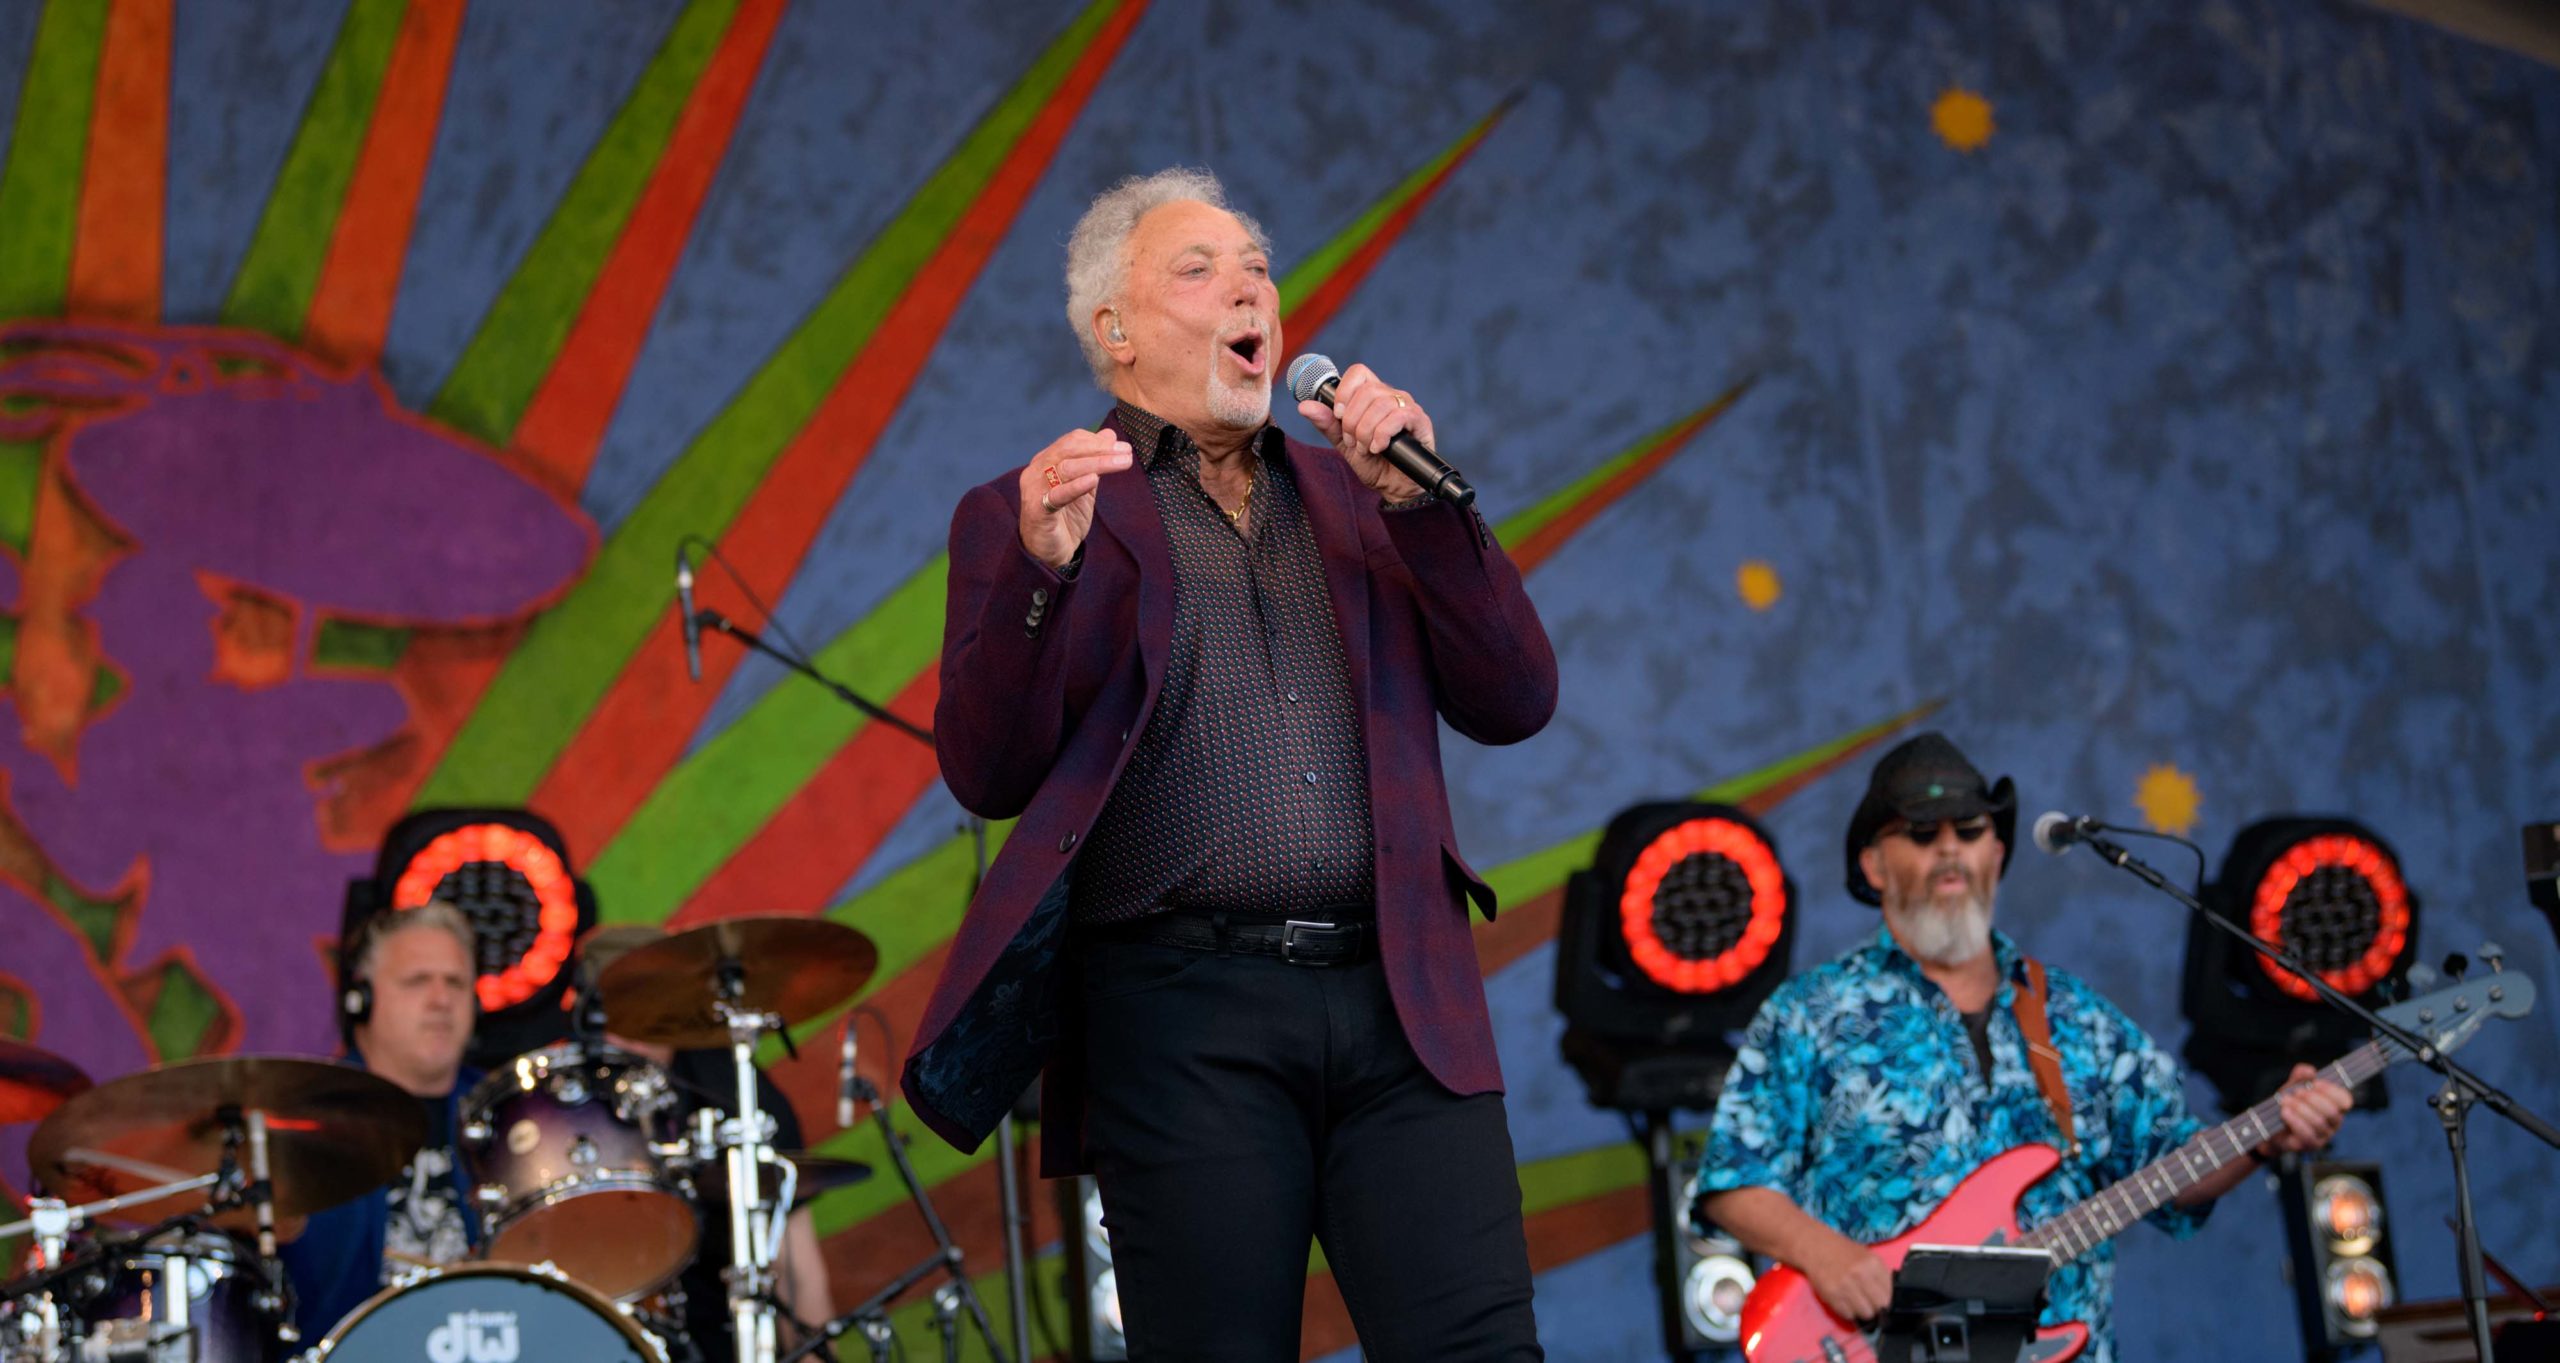 Tom Jones performs on the Gentilly Stage at the Fair Grounds during the New Orleans Jazz and Heritage Festival or Jazz Fest in New Orleans, La. Thursday, May 2, 2019. Photo by Matthew Hinton